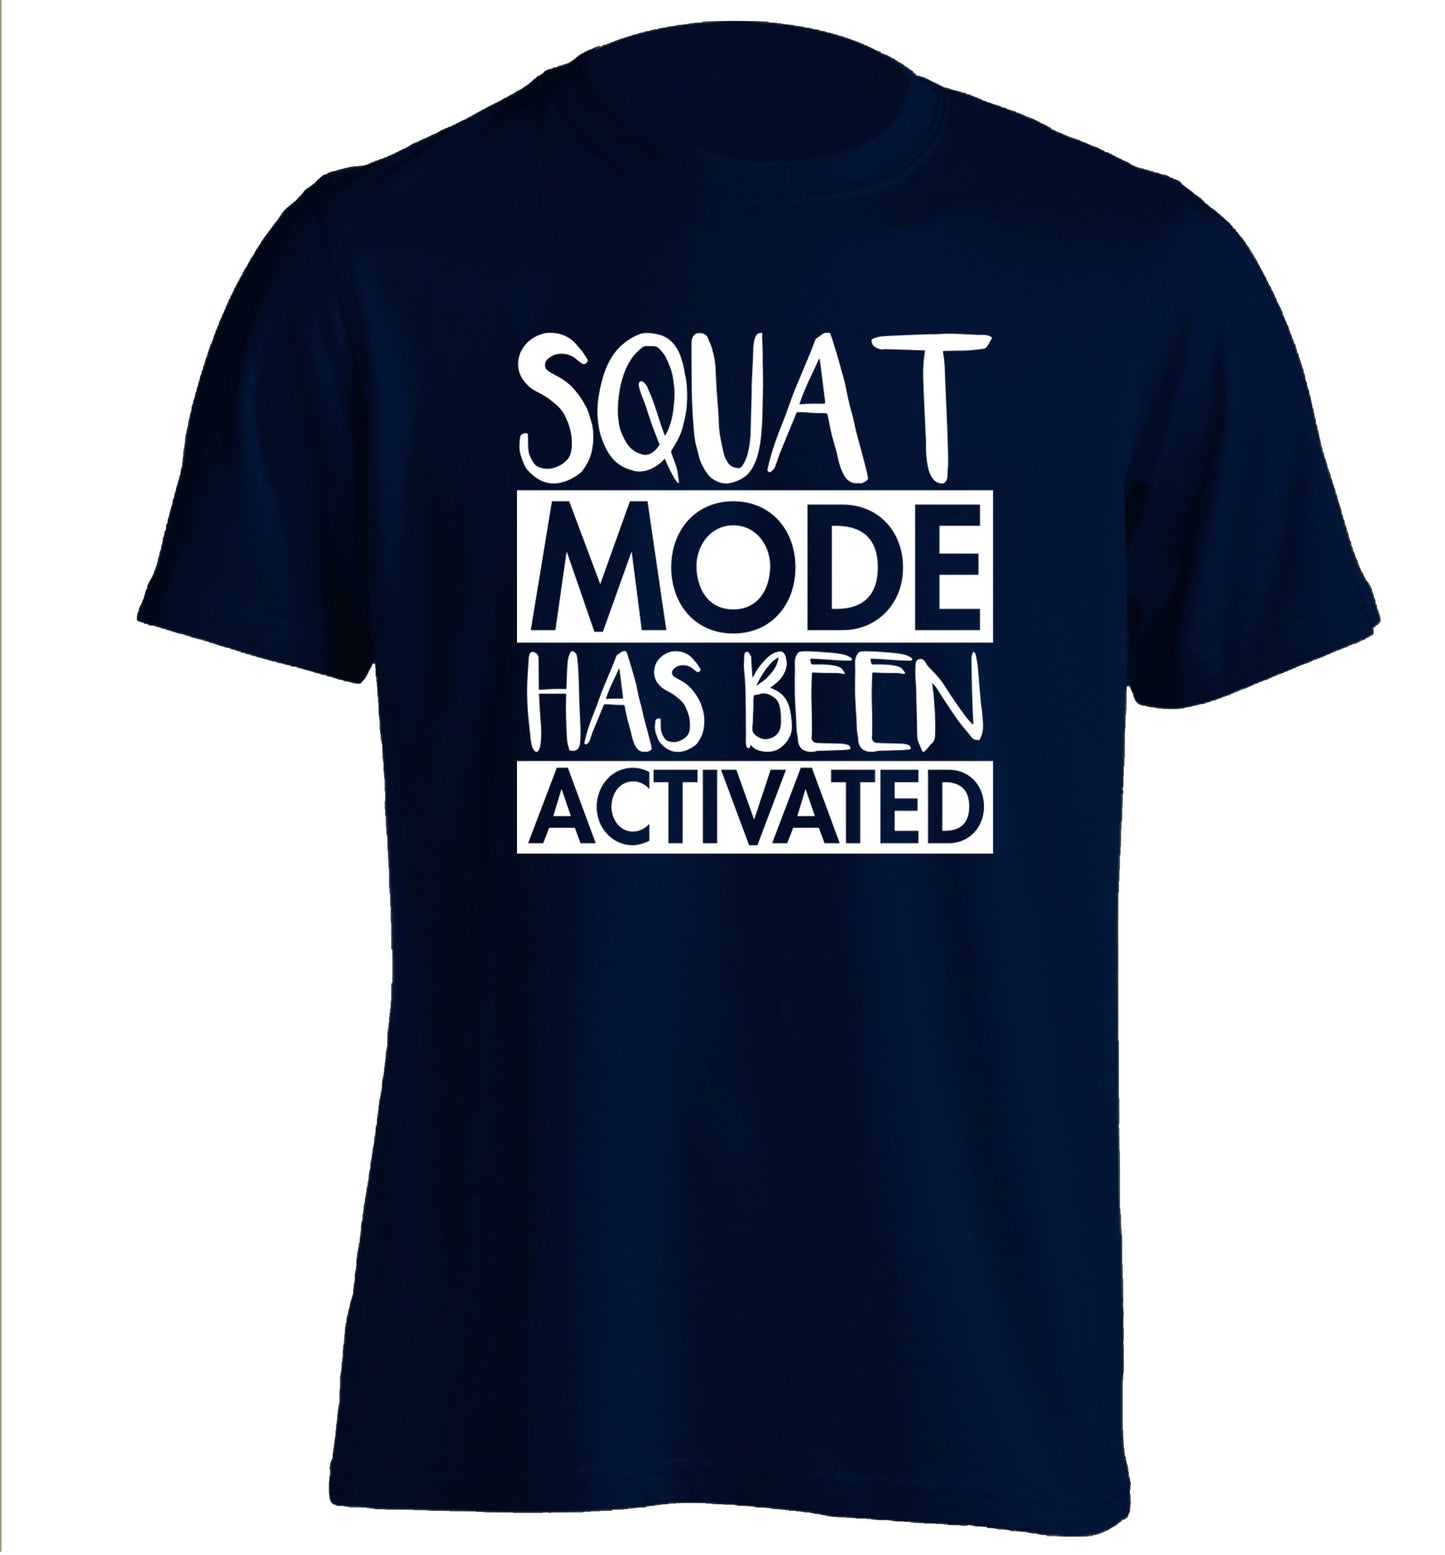 Squat mode activated adults unisex navy Tshirt 2XL